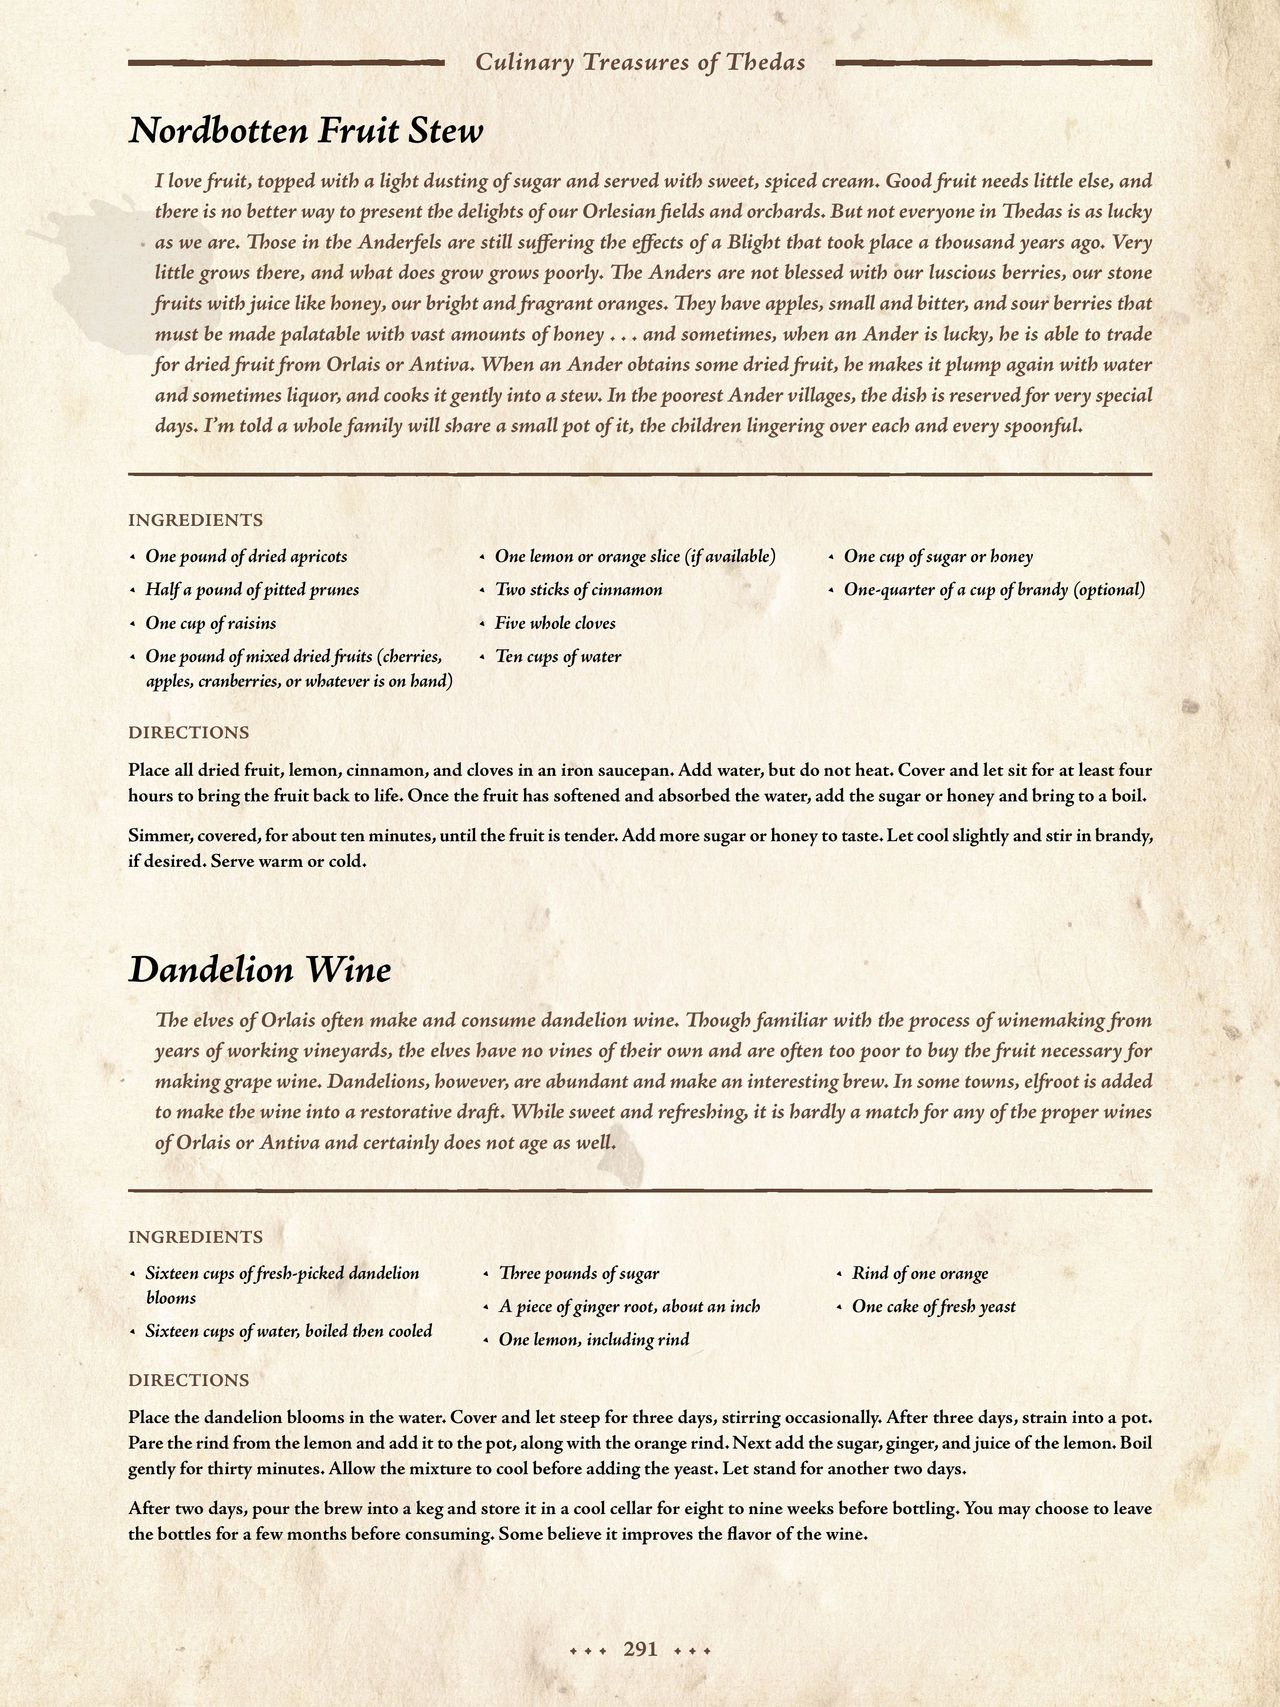 Dragon Age - The World of Thedas v02 282